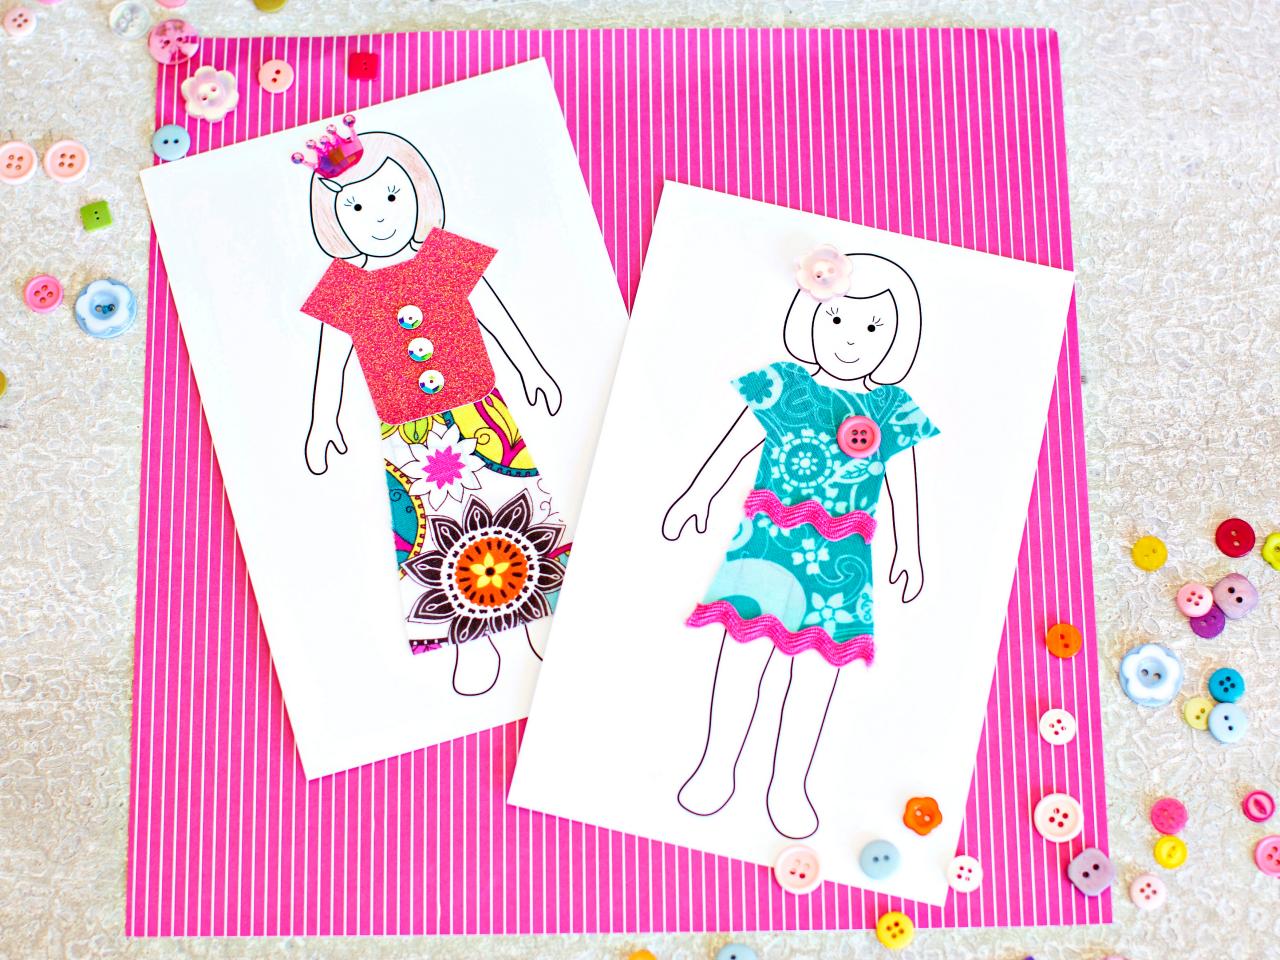 How To Make Paper Dolls With Downloadable Patterns How Tos Diy